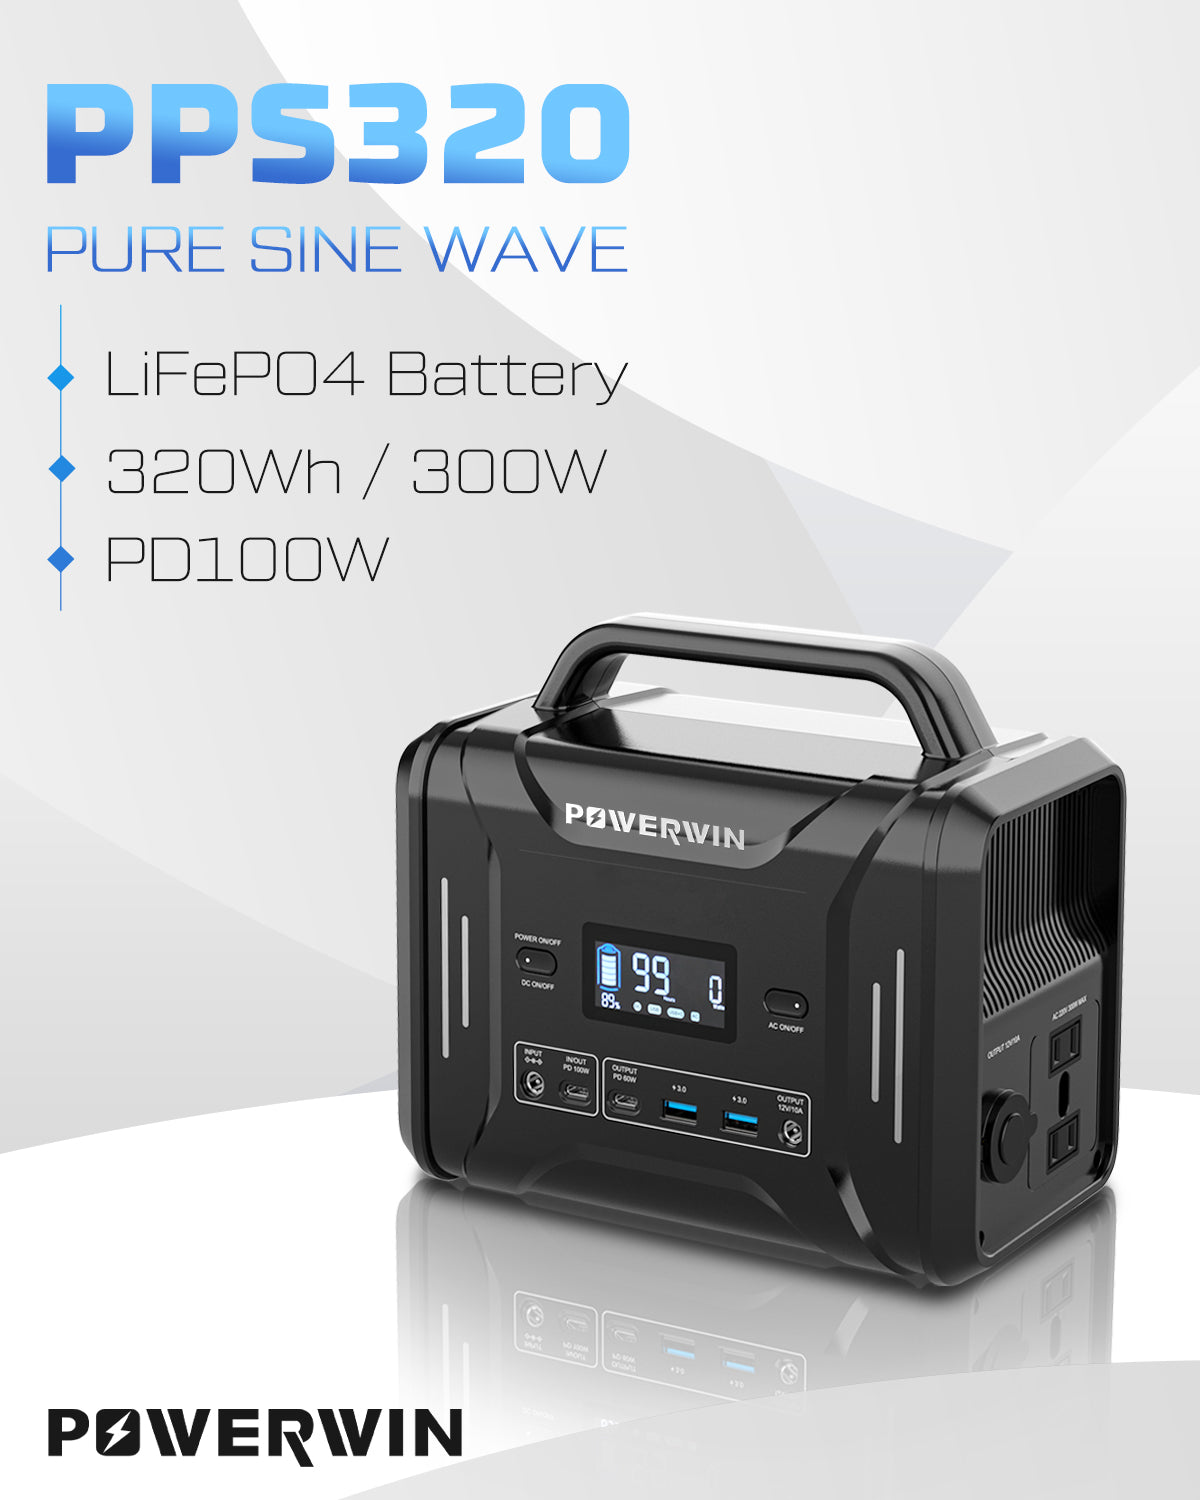 PowerWin Portable Power Station PPS320